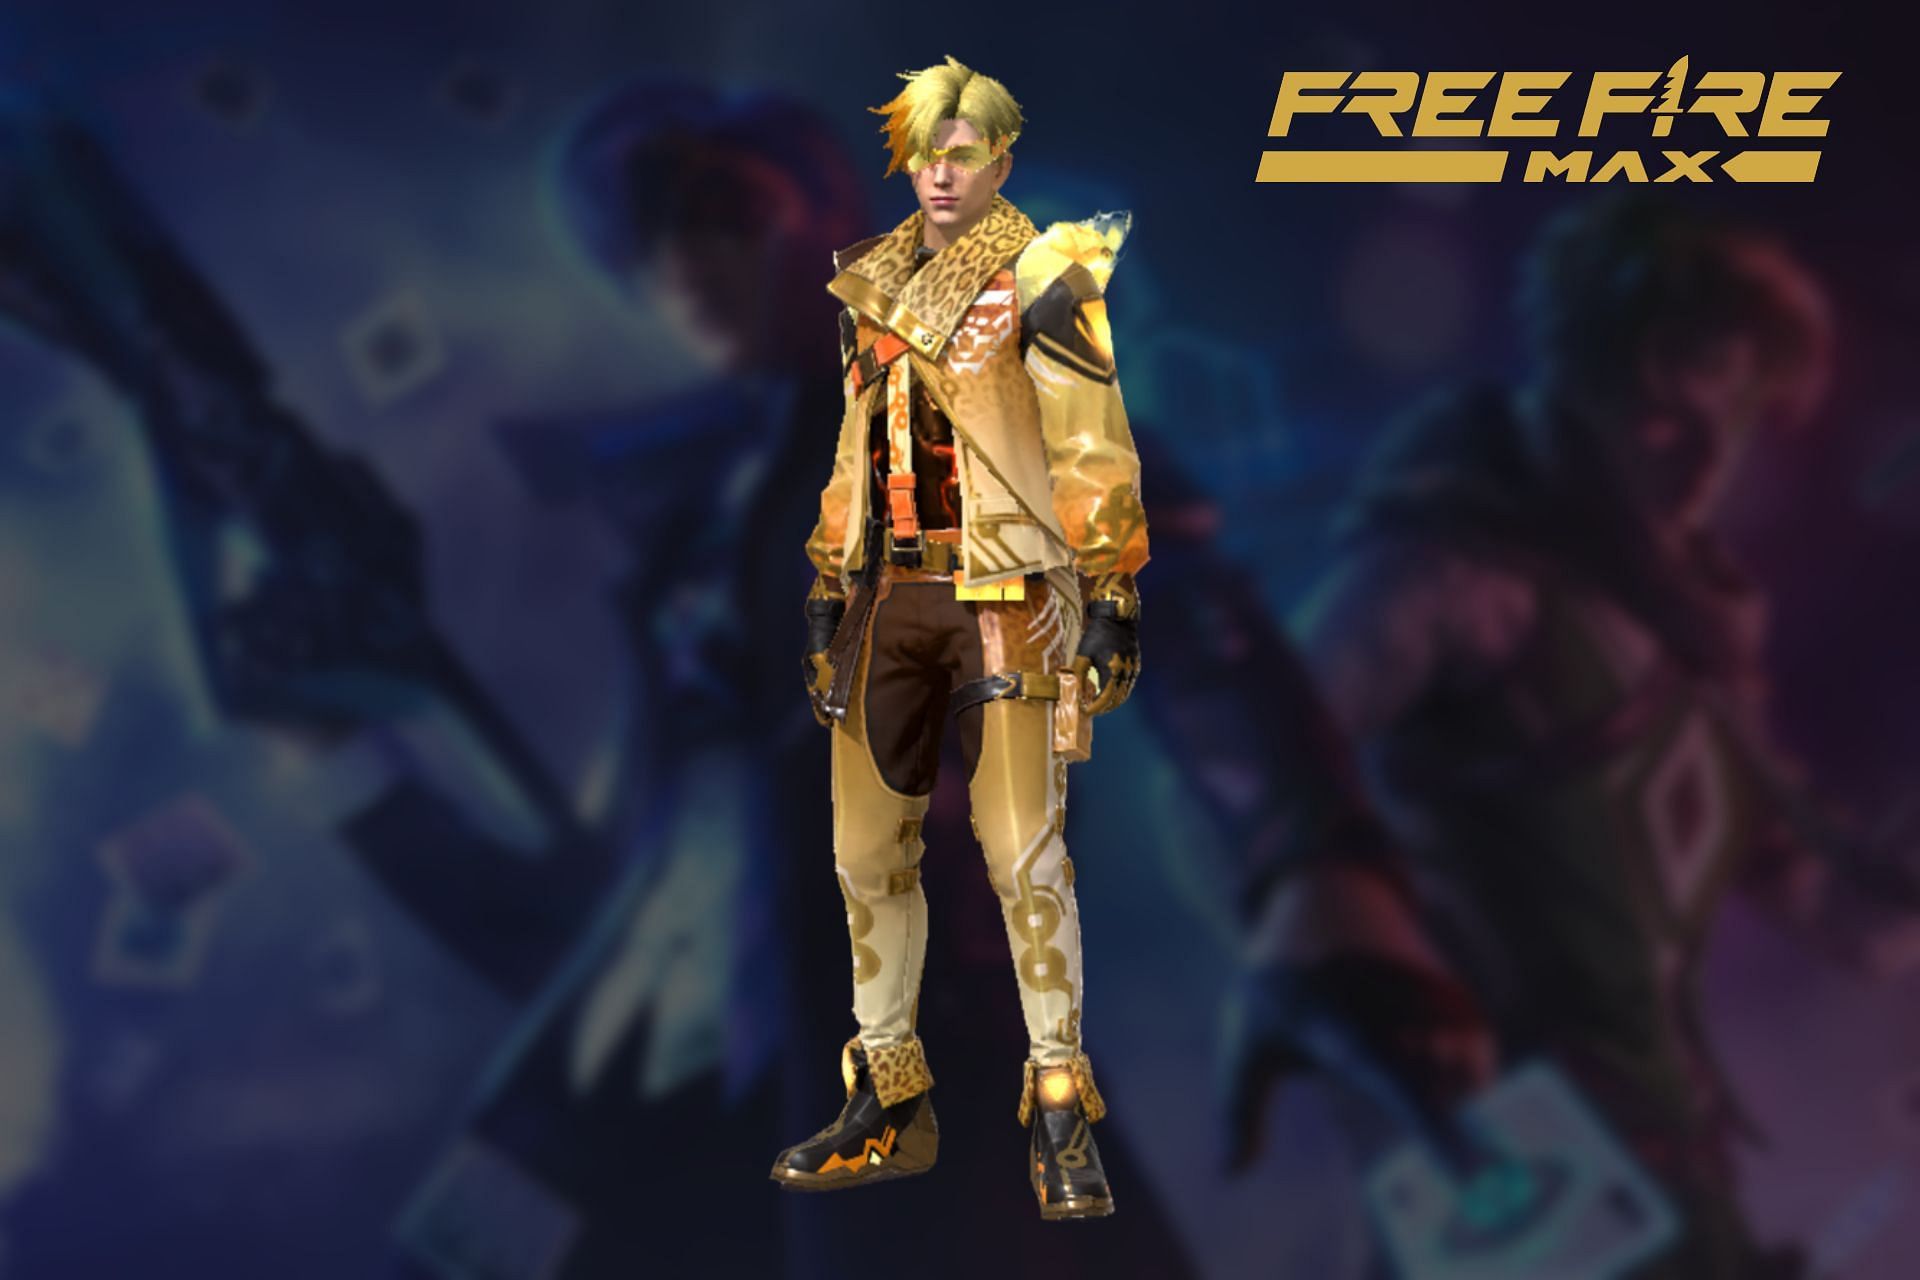 The next Incubator of Free Fire MAX has been leaked (Image via Sportskeeda)